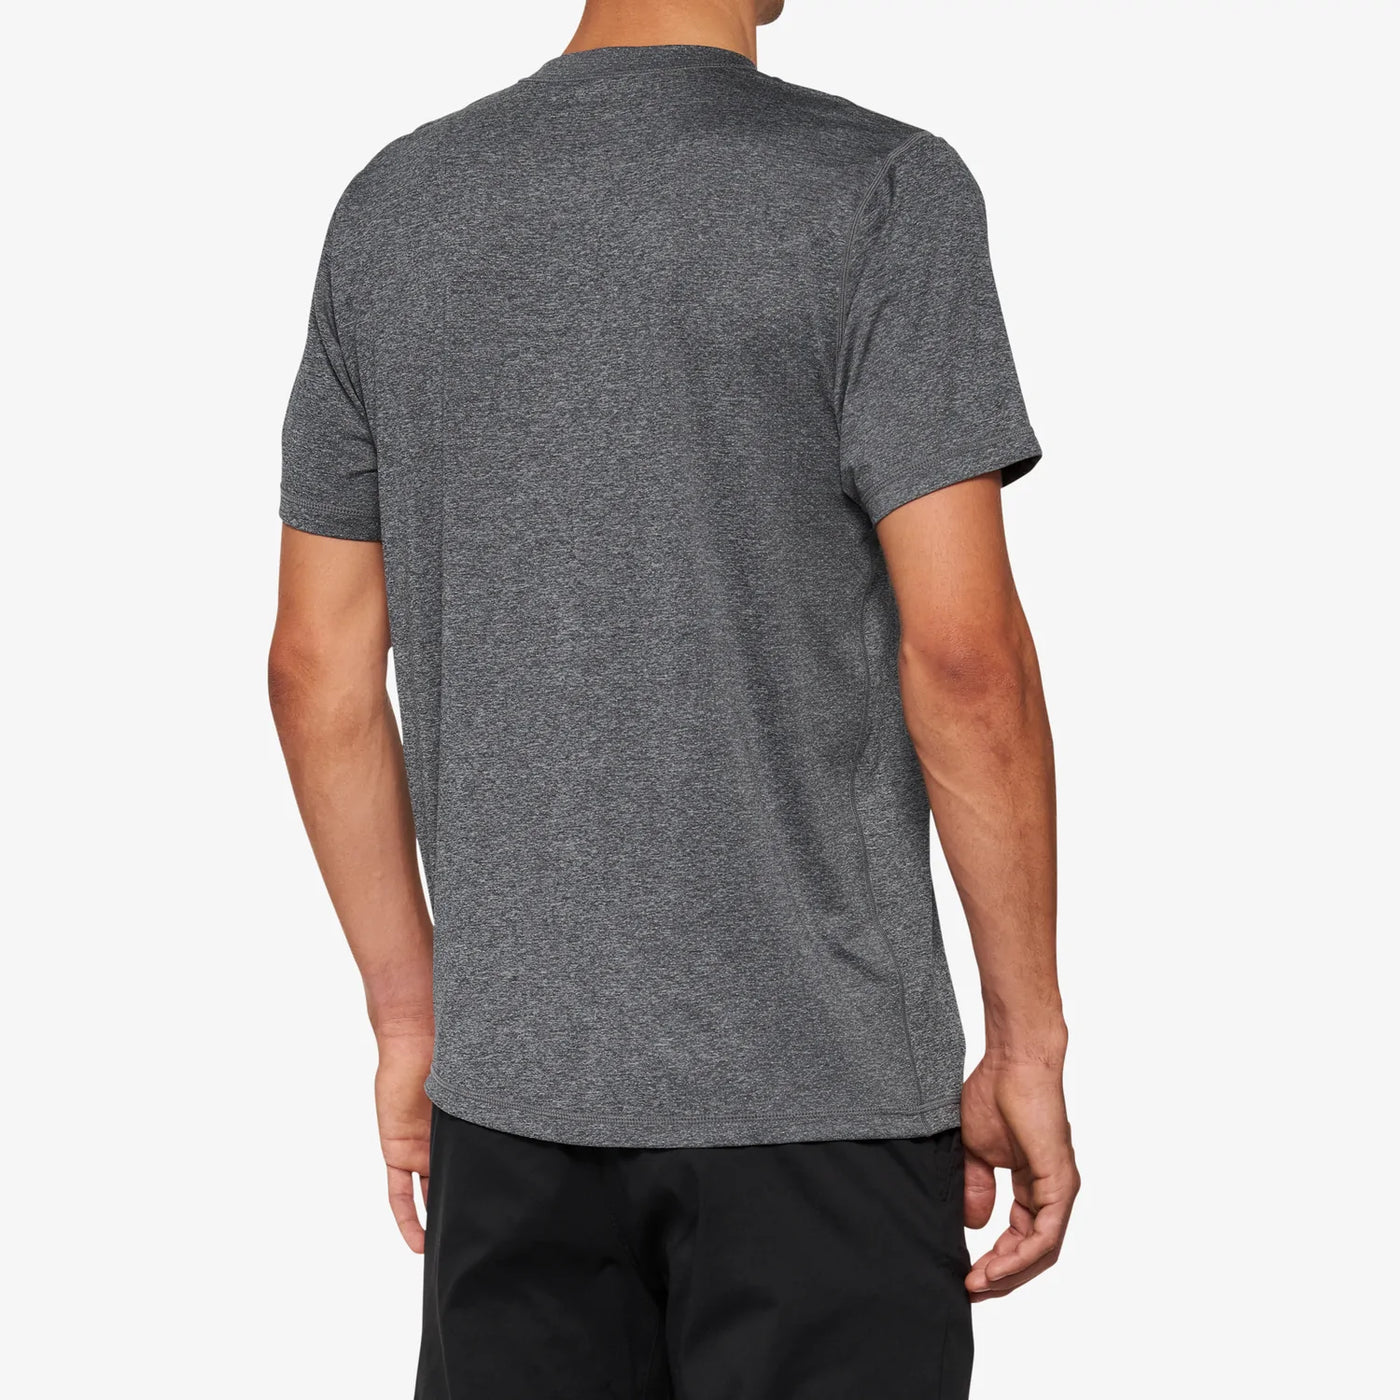 MISSION Athletic Short Sleeve Tee Charcoal